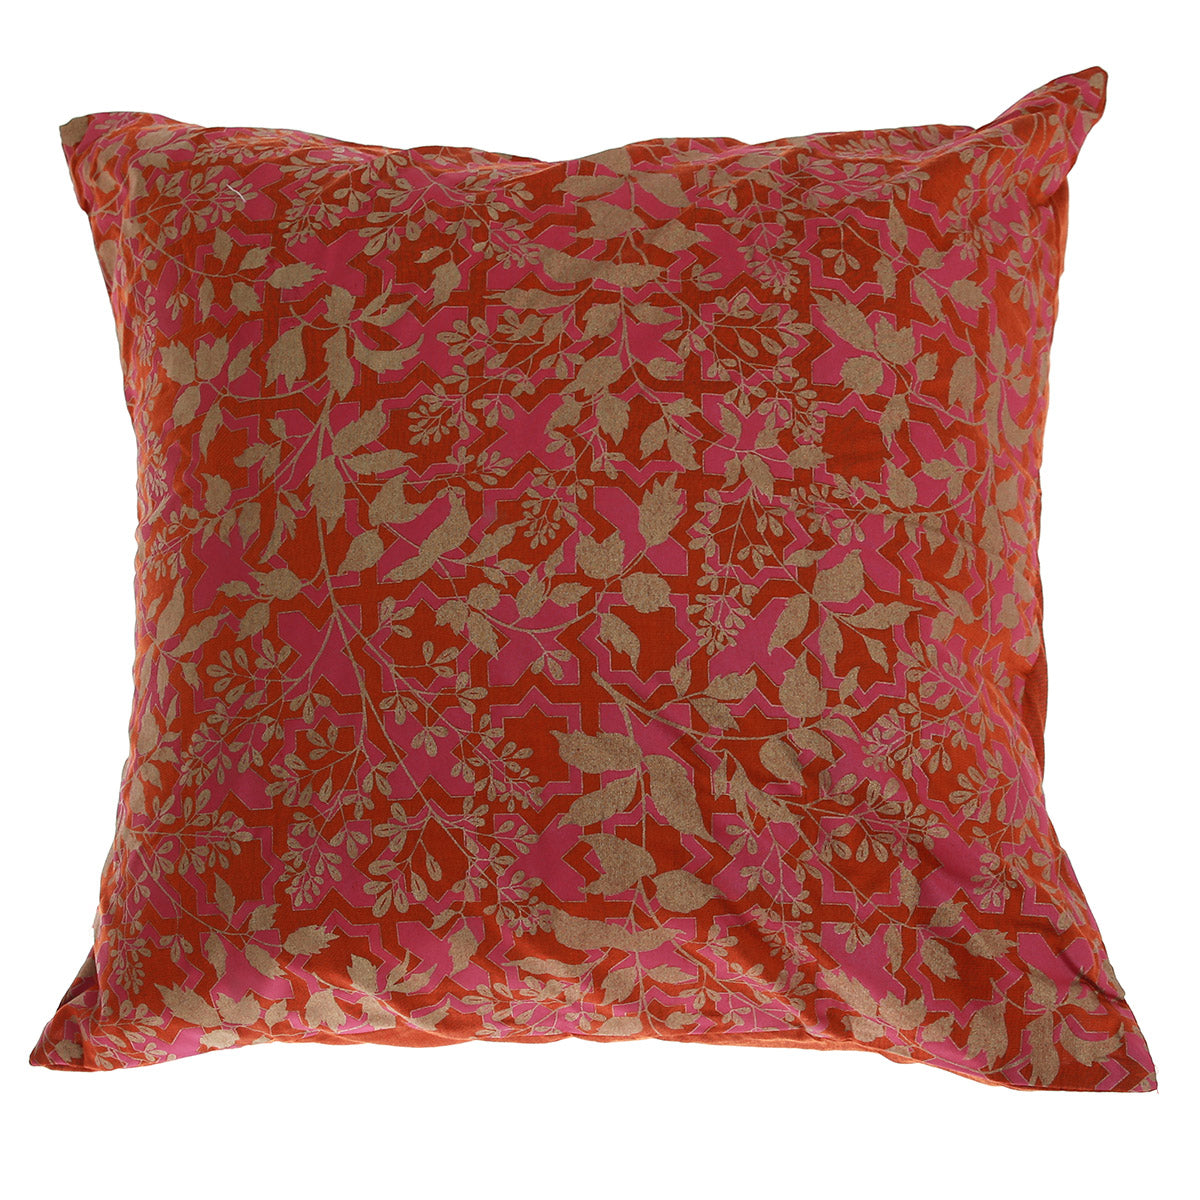 Rust Gold Floral Cushion Cover 18x18